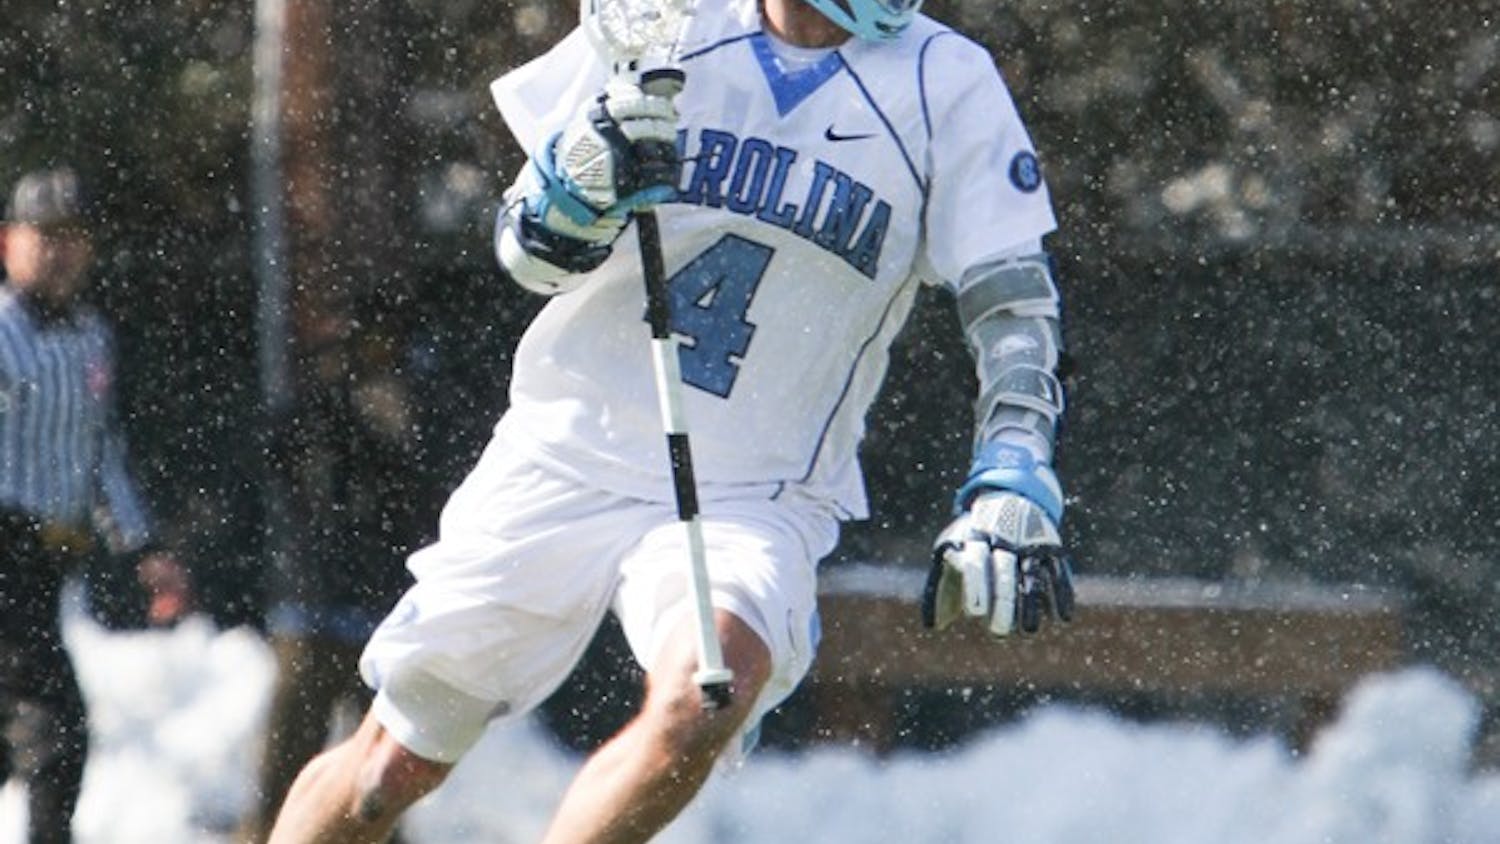 All-American attackman Billy Bitter grabbed two assists in North Carolina’s 5-4 win against Bryant University. DTH/Phong Dinh